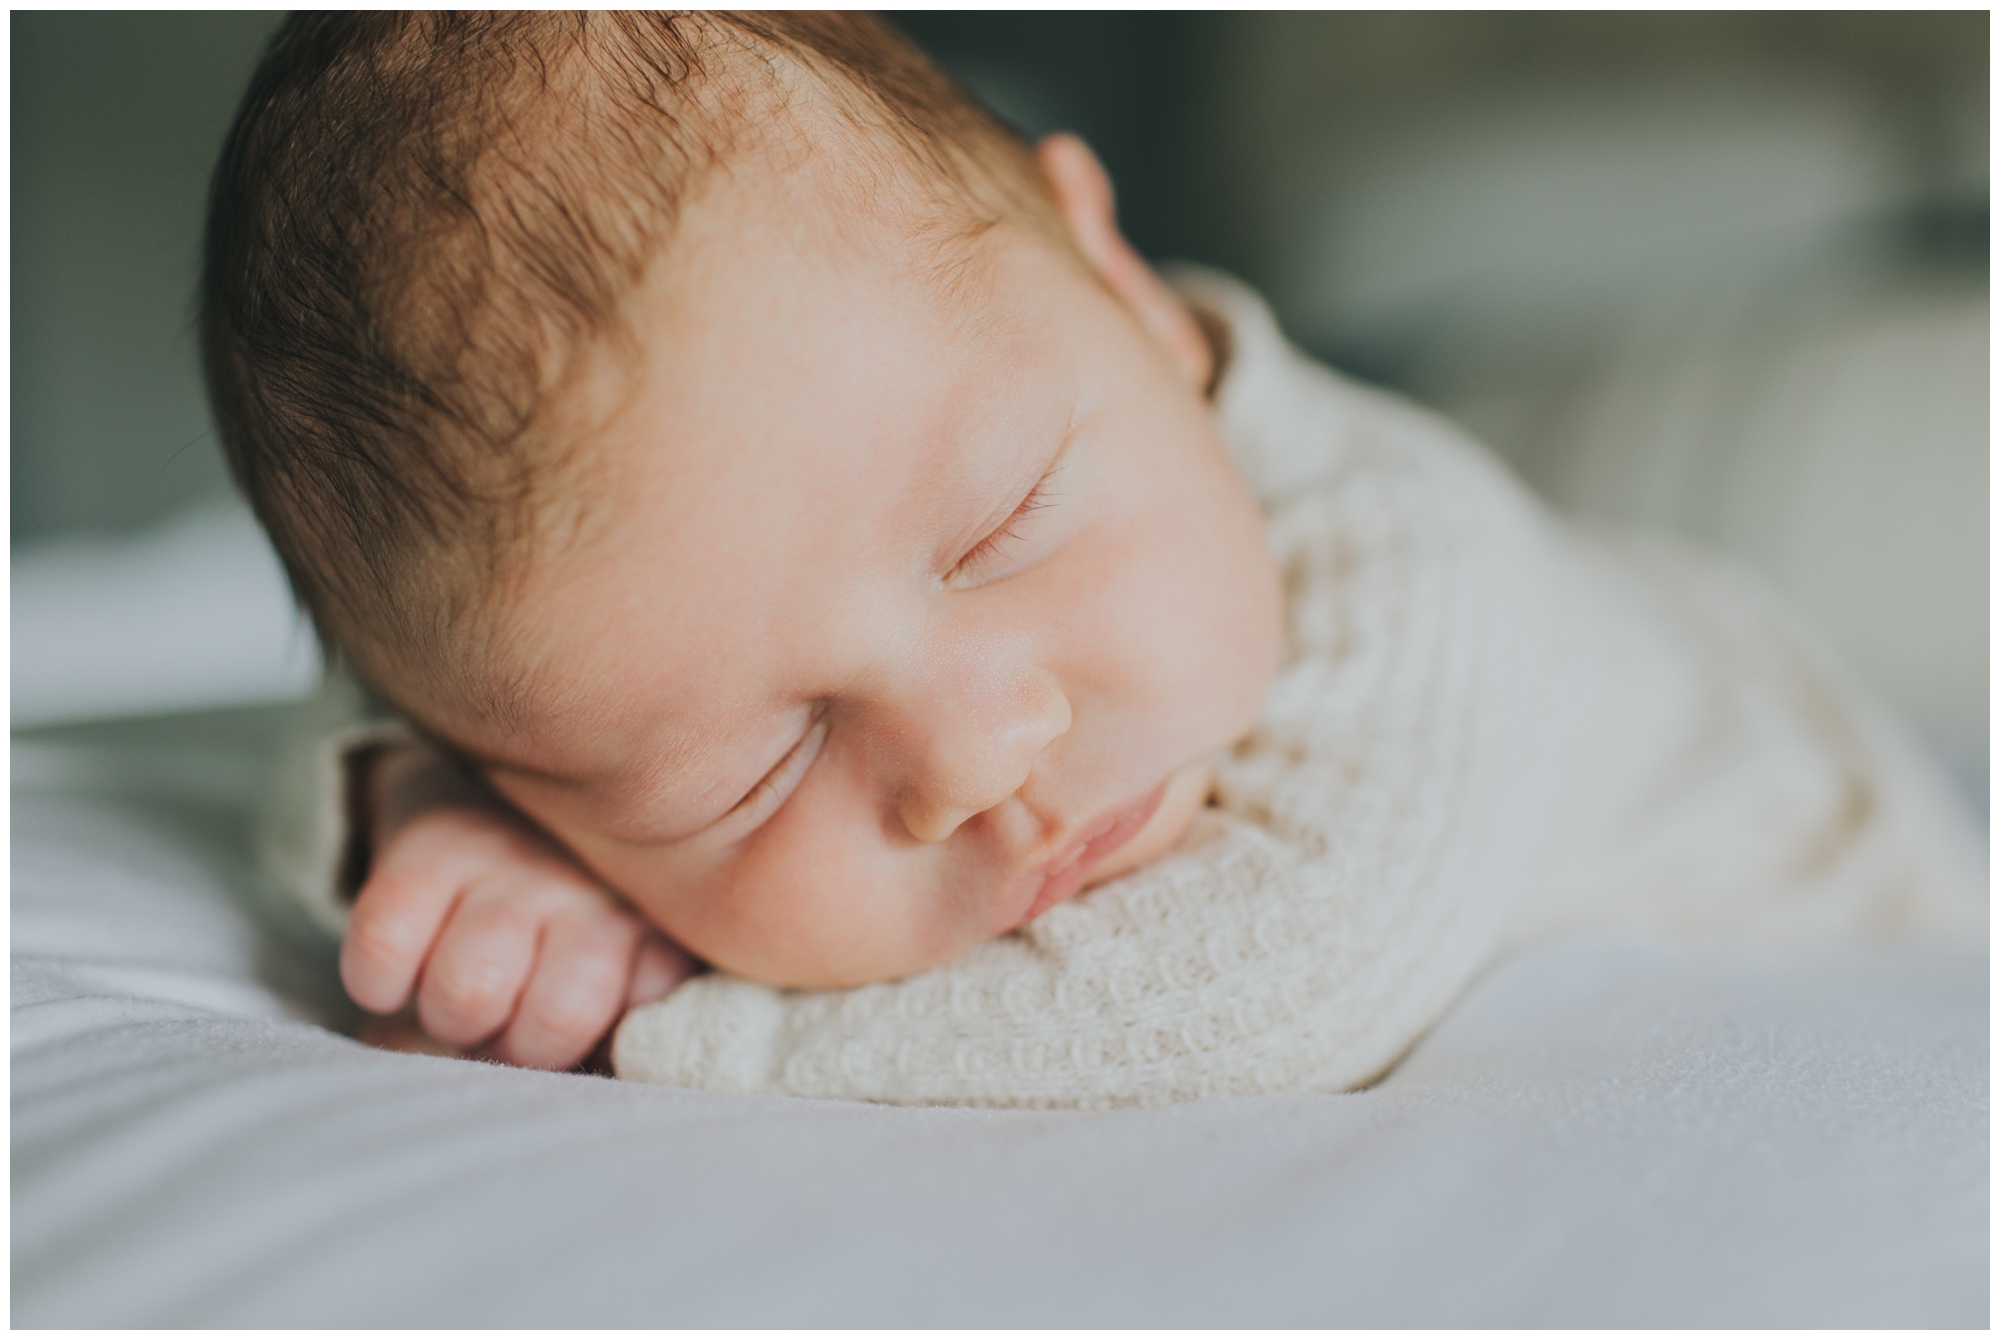 in-home Chicago newborn session, photographed by Meg Adamik Creative